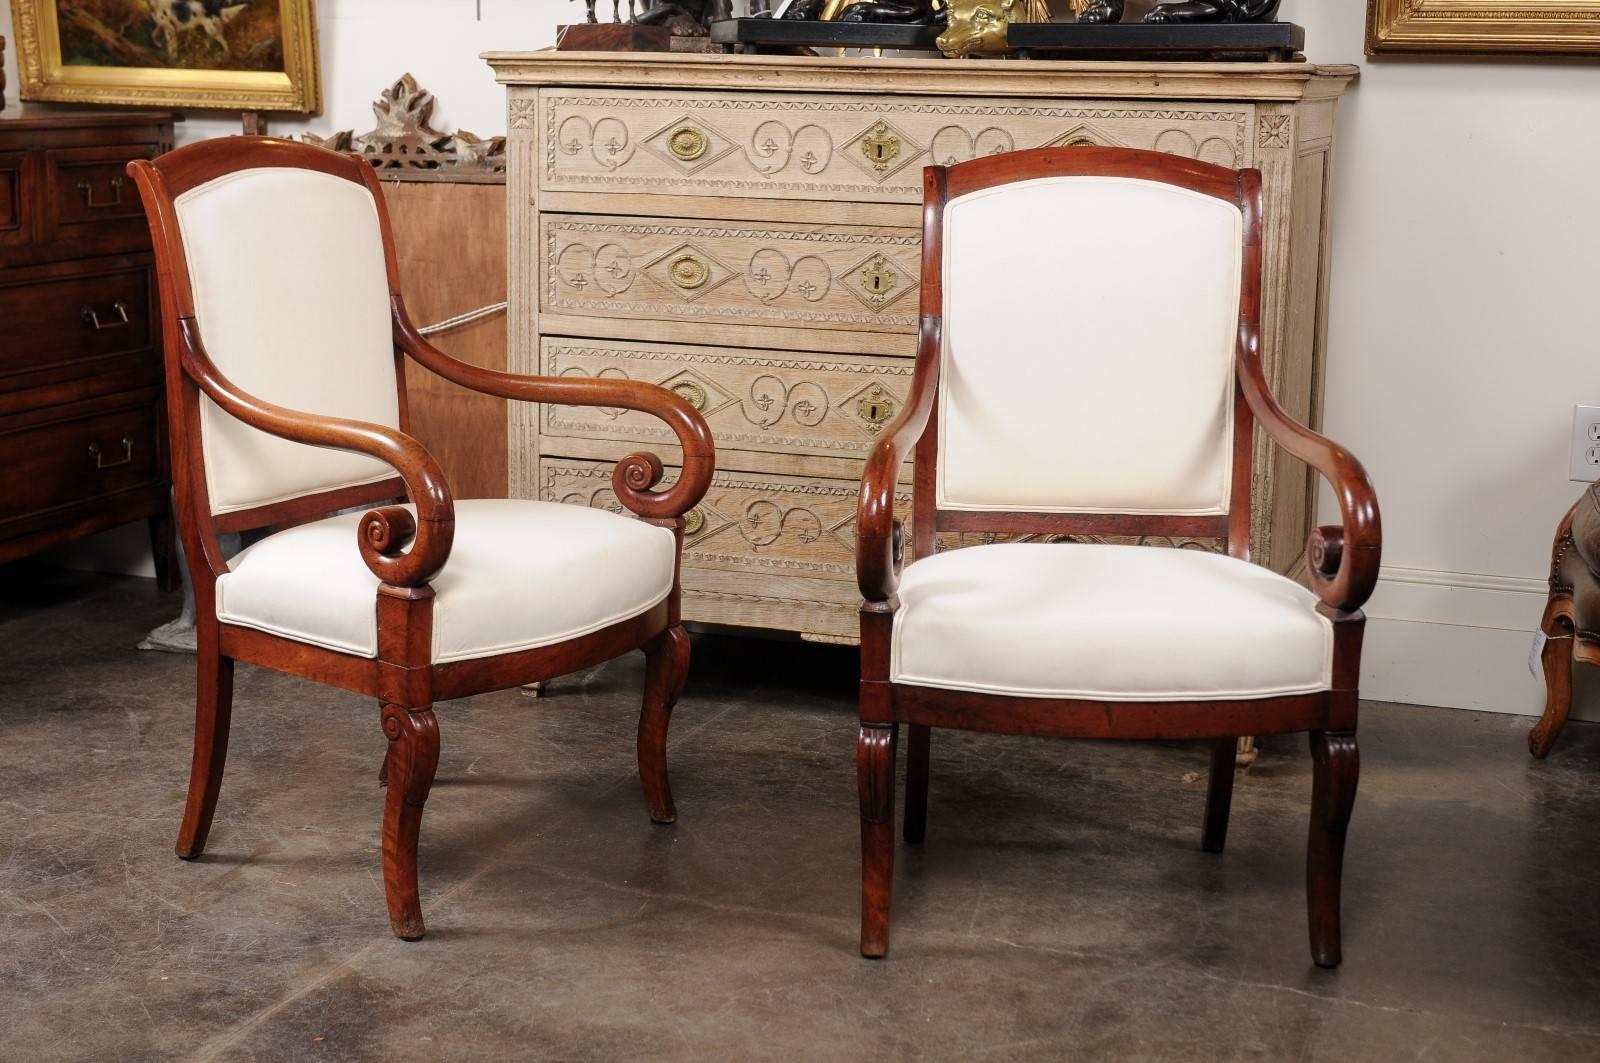 This pair of French Empire style walnut fauteuils from the mid-19th century features slightly out-scrolled backs with beautifully scrolled arms. The armchairs are raised on four legs each, two cabrioles - reminiscent of the Louis XV era - in front,